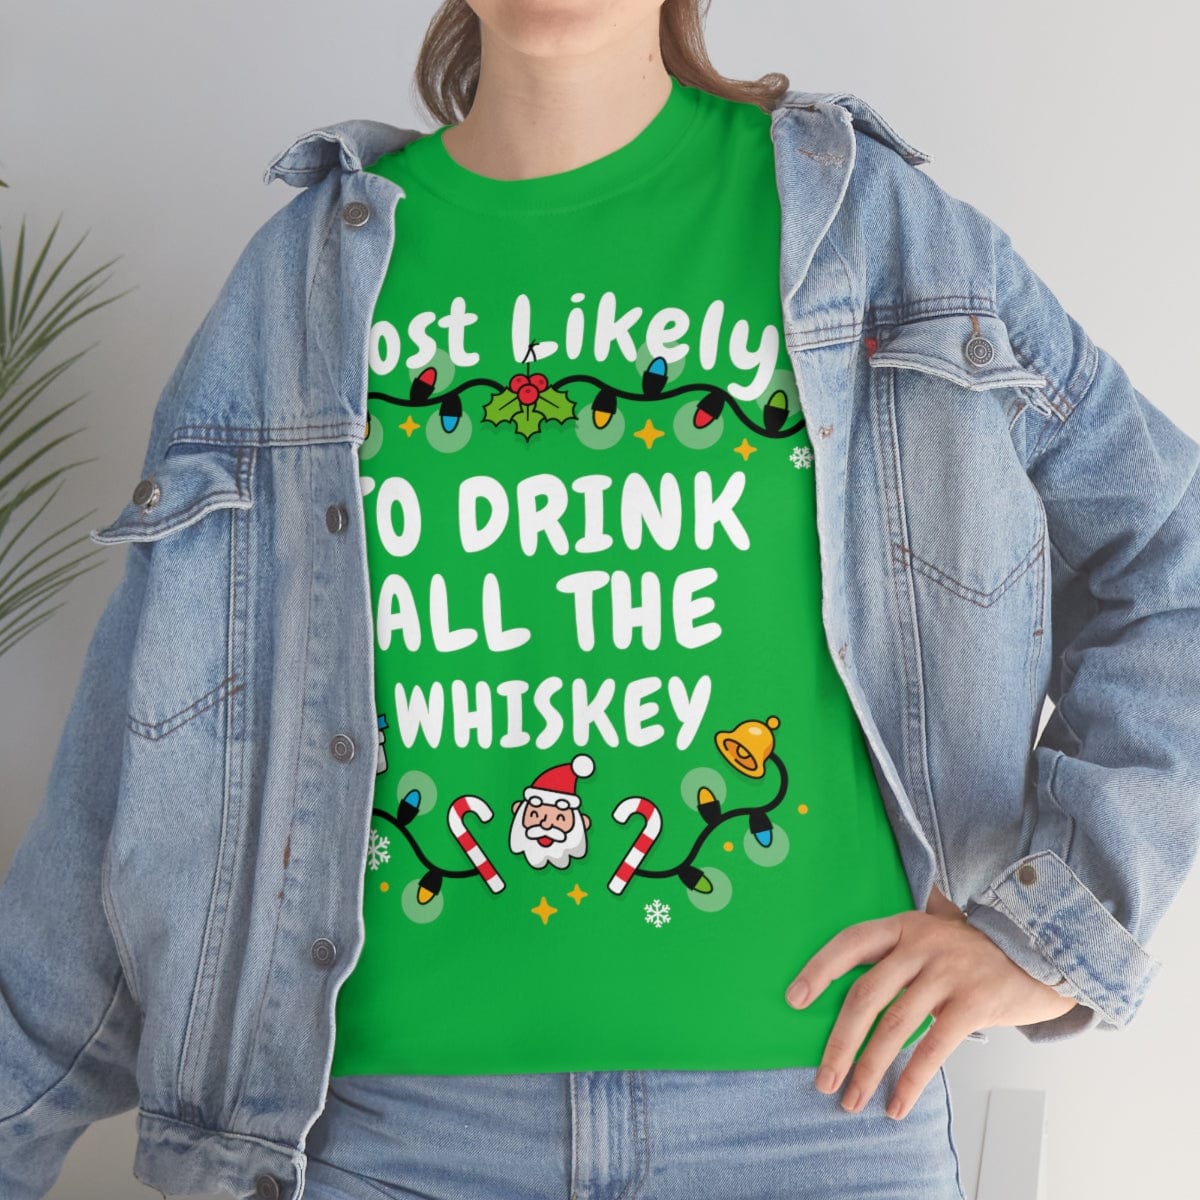 TO DRINK ALL THE WHISKEY